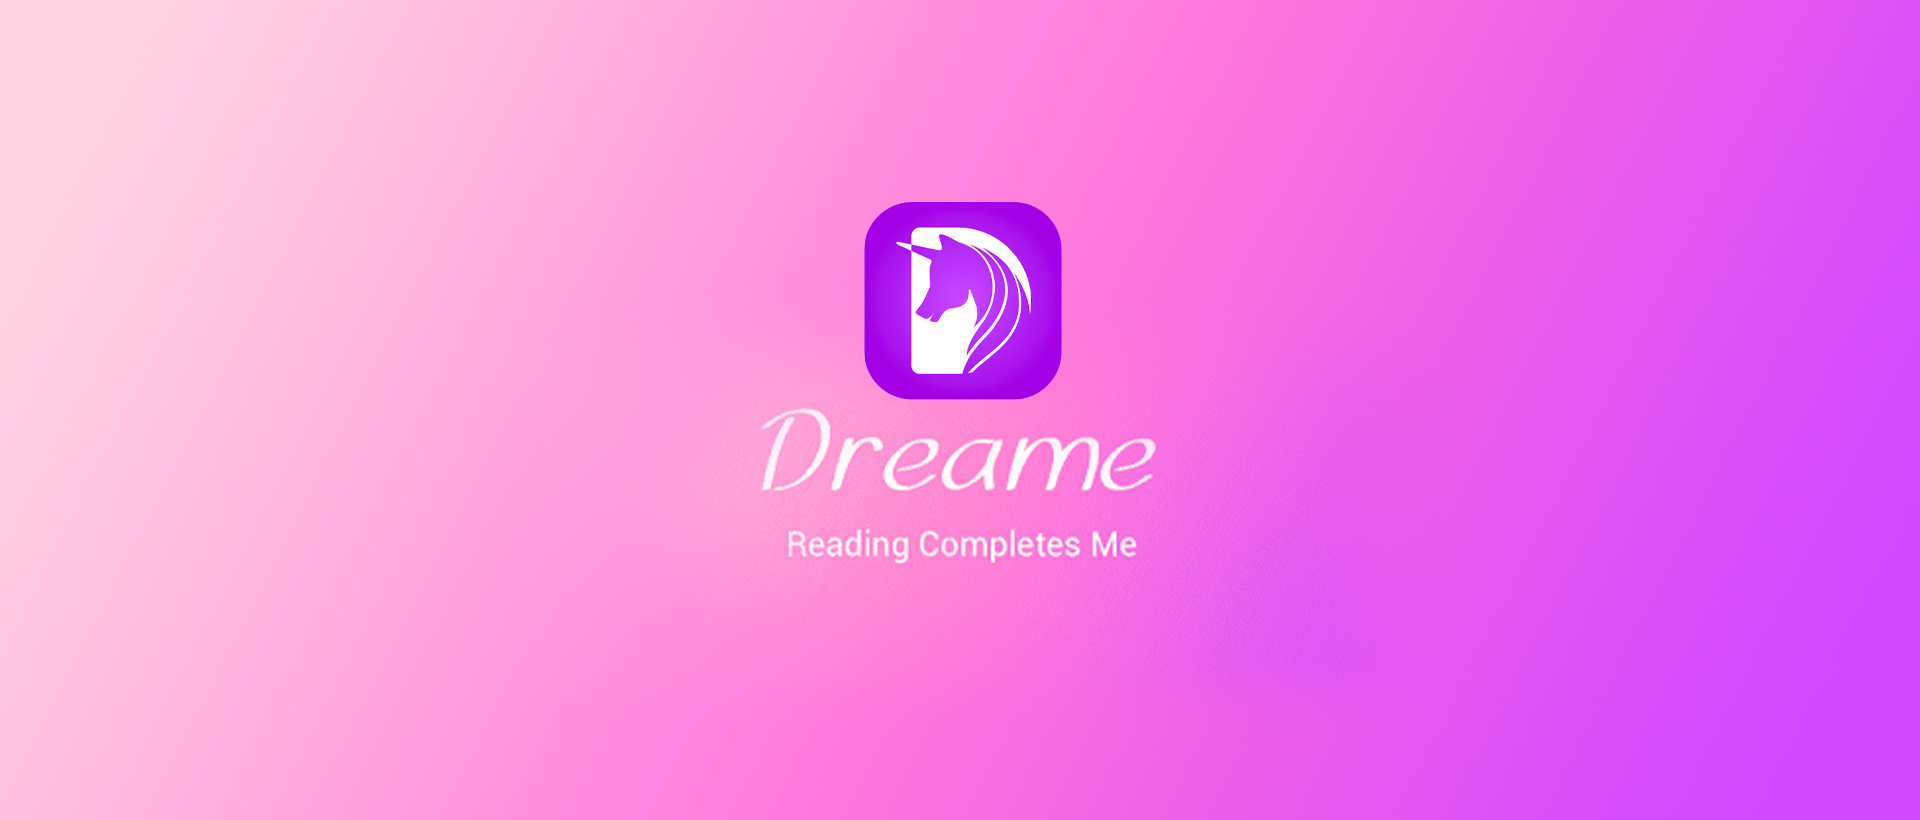 Publiseer To Distribute Ebooks To Dreame